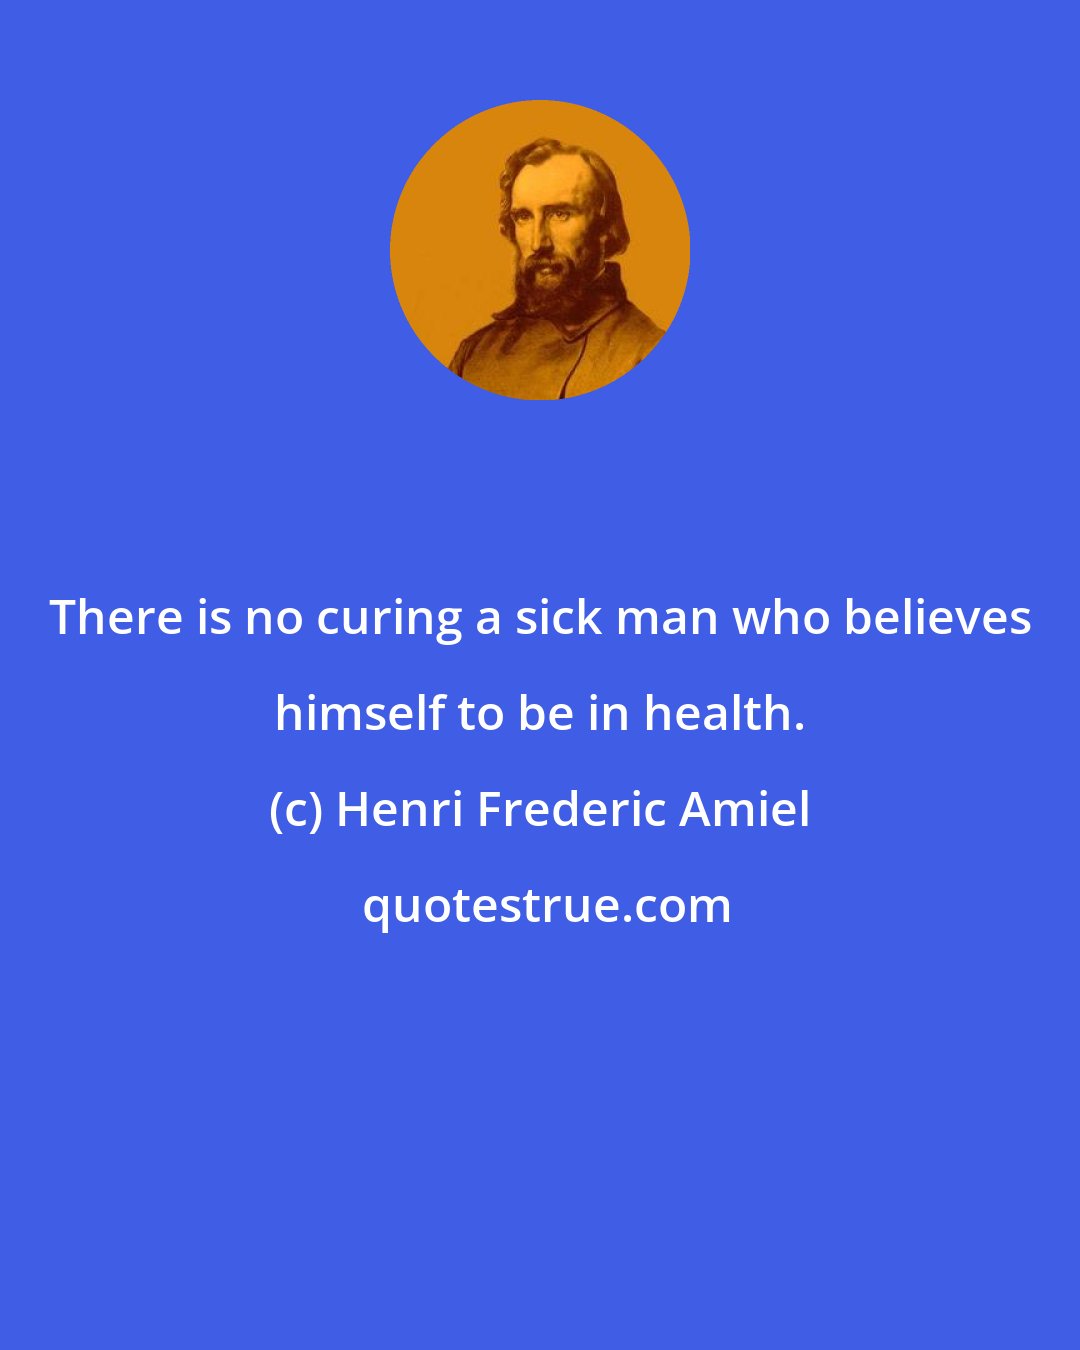 Henri Frederic Amiel: There is no curing a sick man who believes himself to be in health.